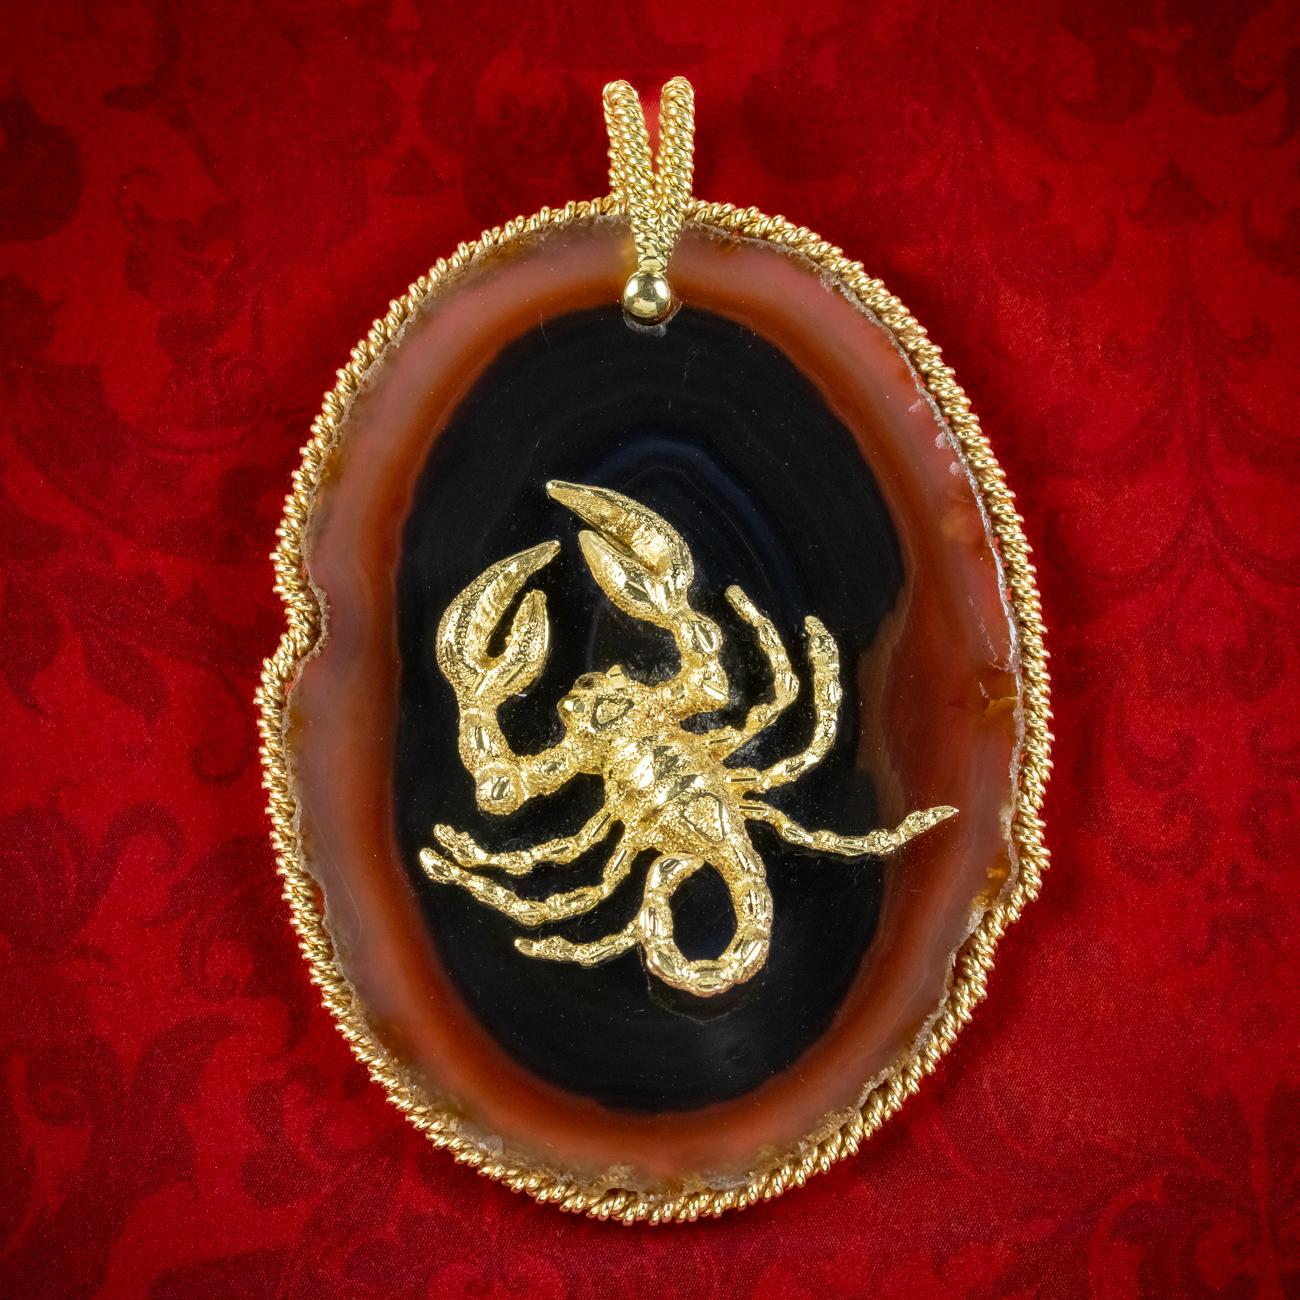 A remarkable vintage Scorpio Zodiac pendant built around an enormous, flat cut agate with a striking 18ct gold scorpion on top. It has been intricately detailed and contrasts beautifully against the agates black core with beautiful, chocolate brown